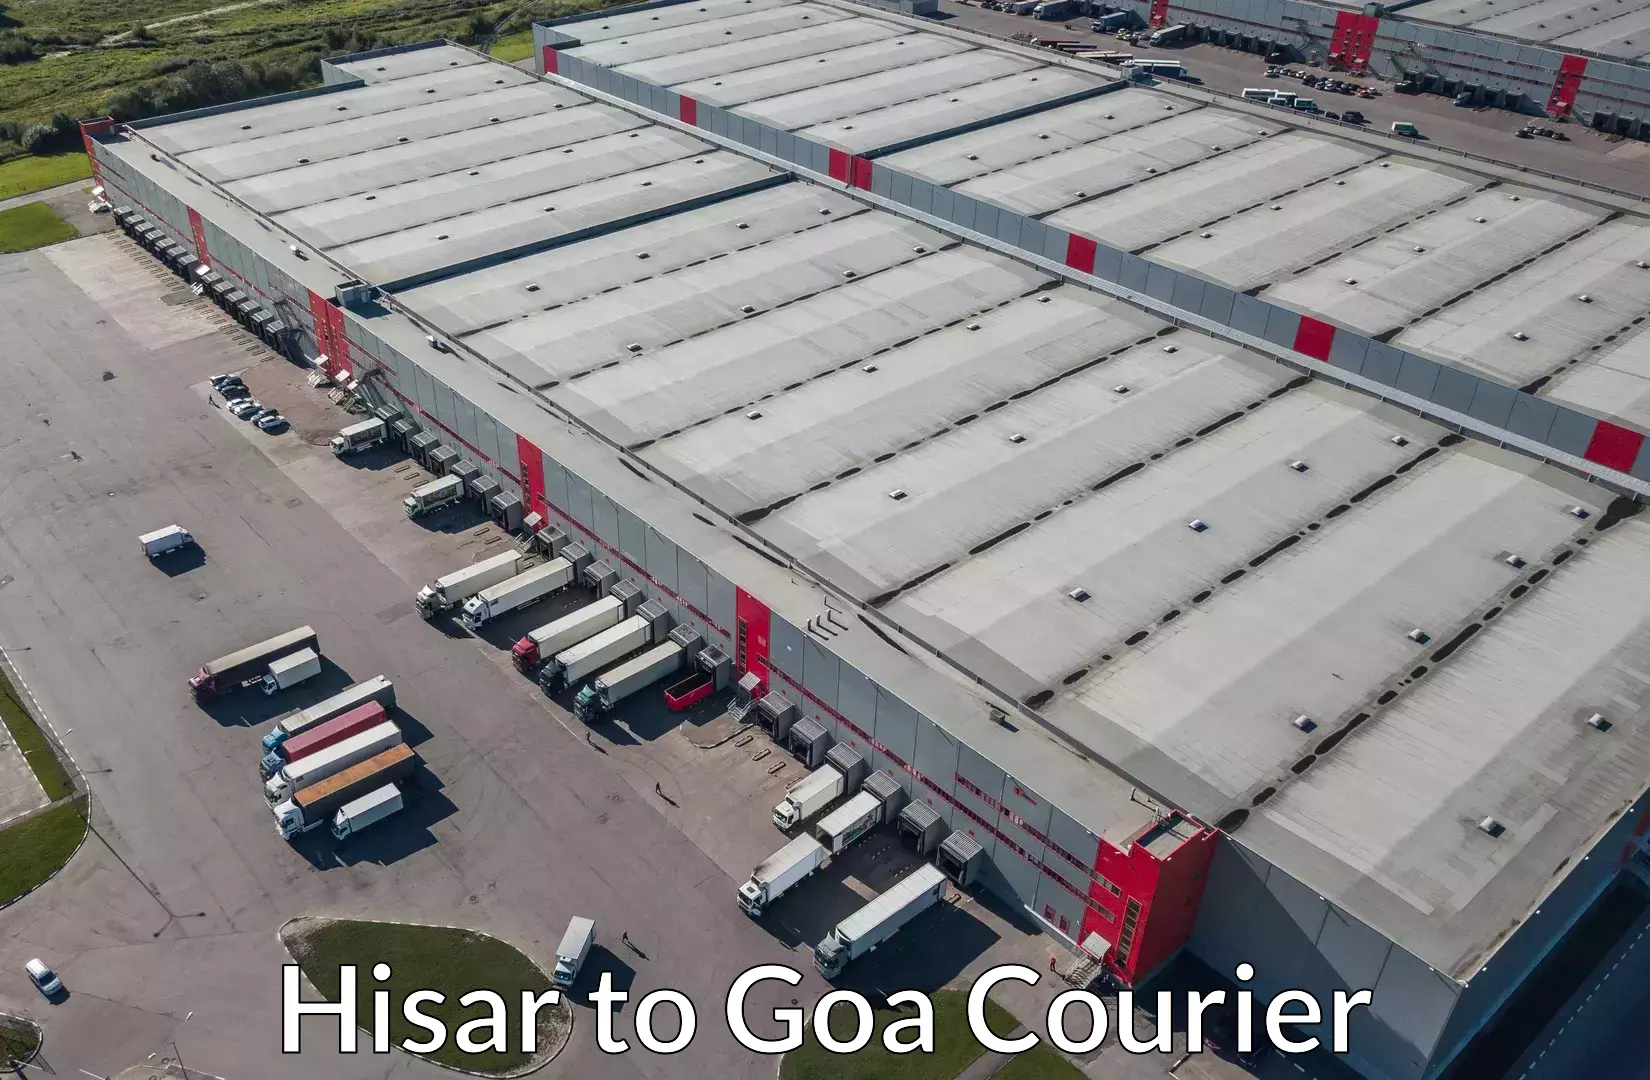 Baggage transport network Hisar to Goa